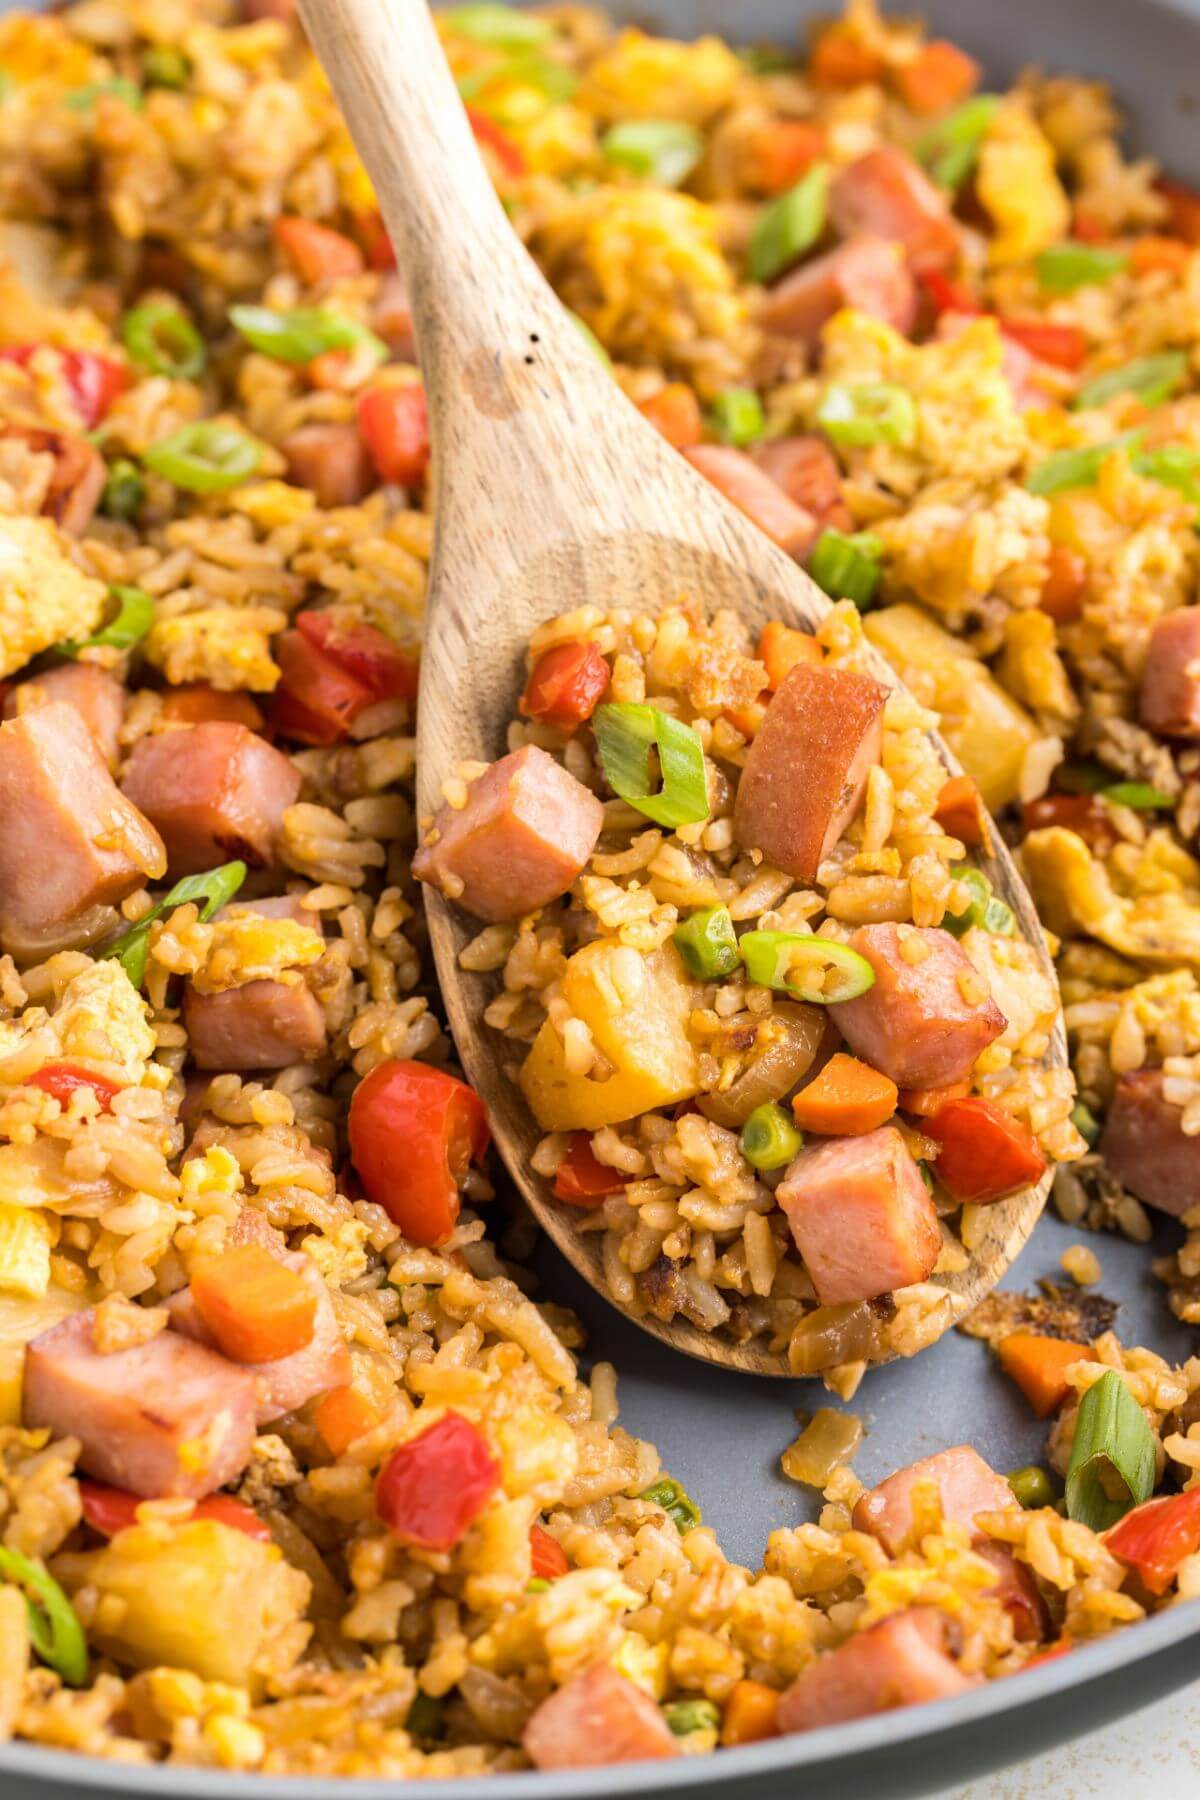 A wooden spoon scoops up fried rice from the pan.